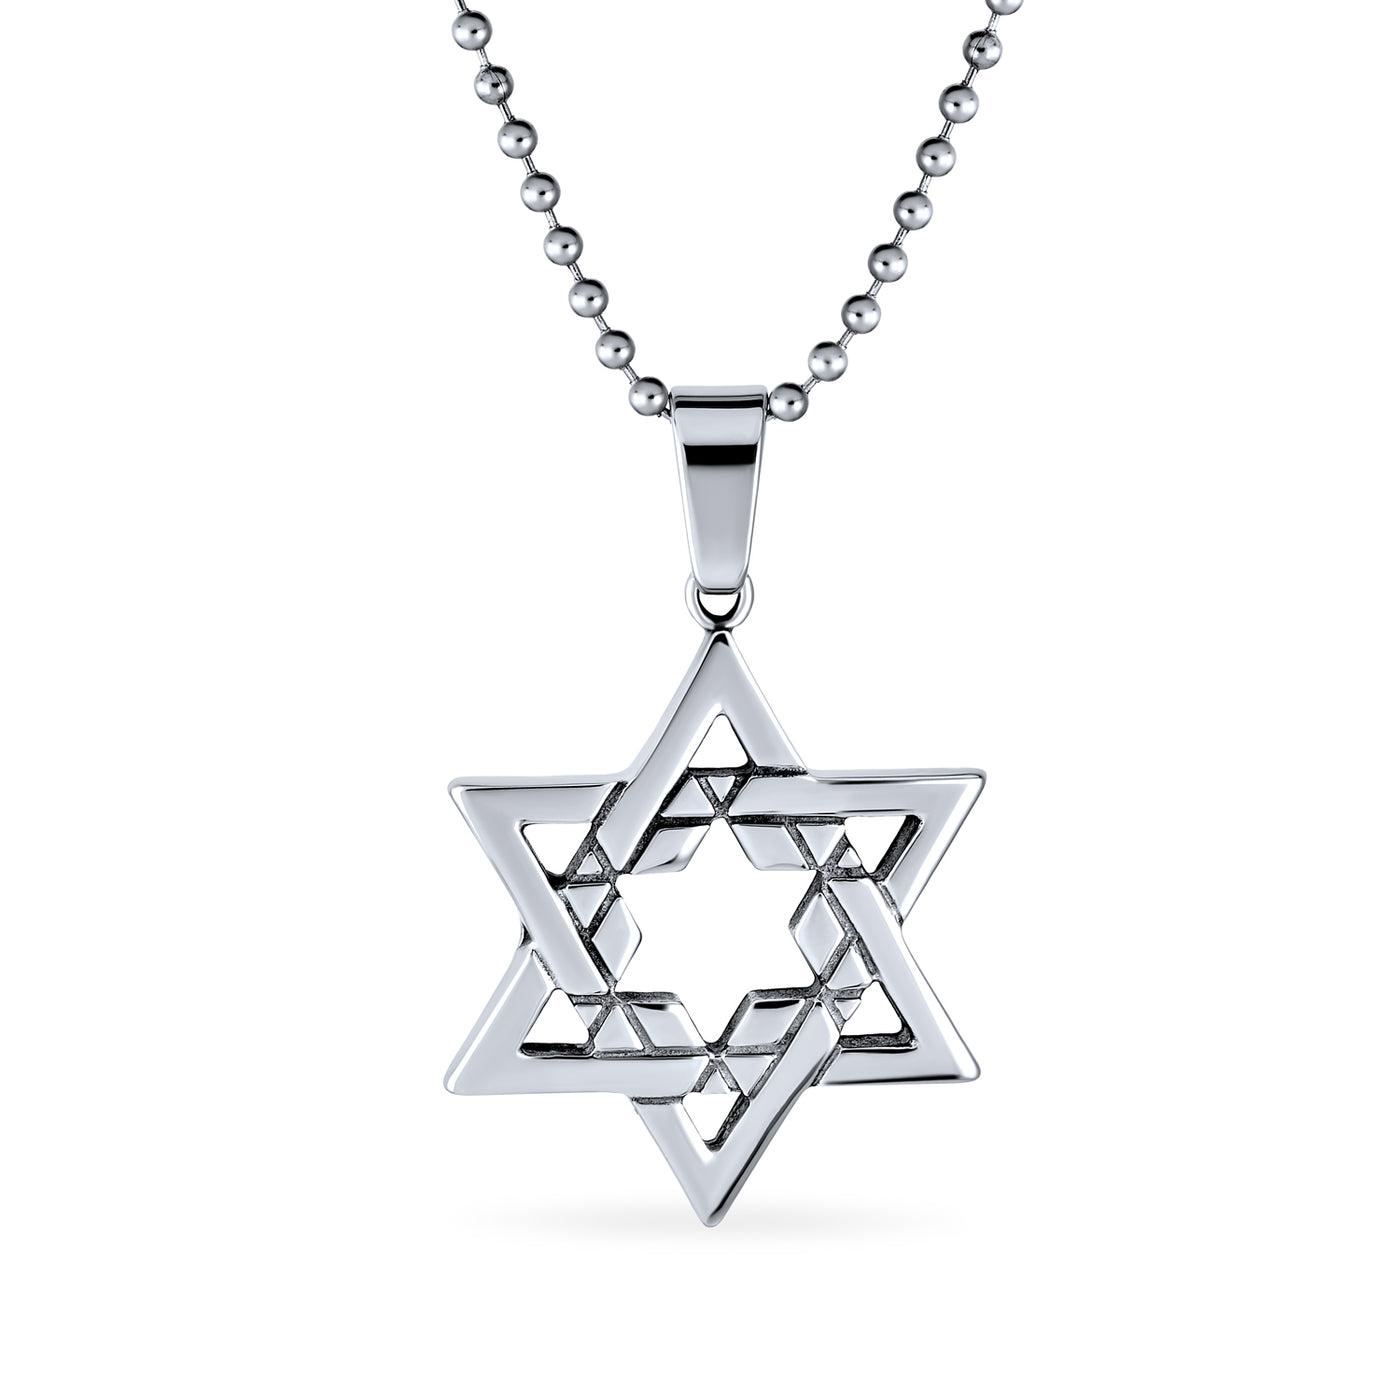 Jewish Star OF David Religious Pendant Stainless Steel Necklace Ball